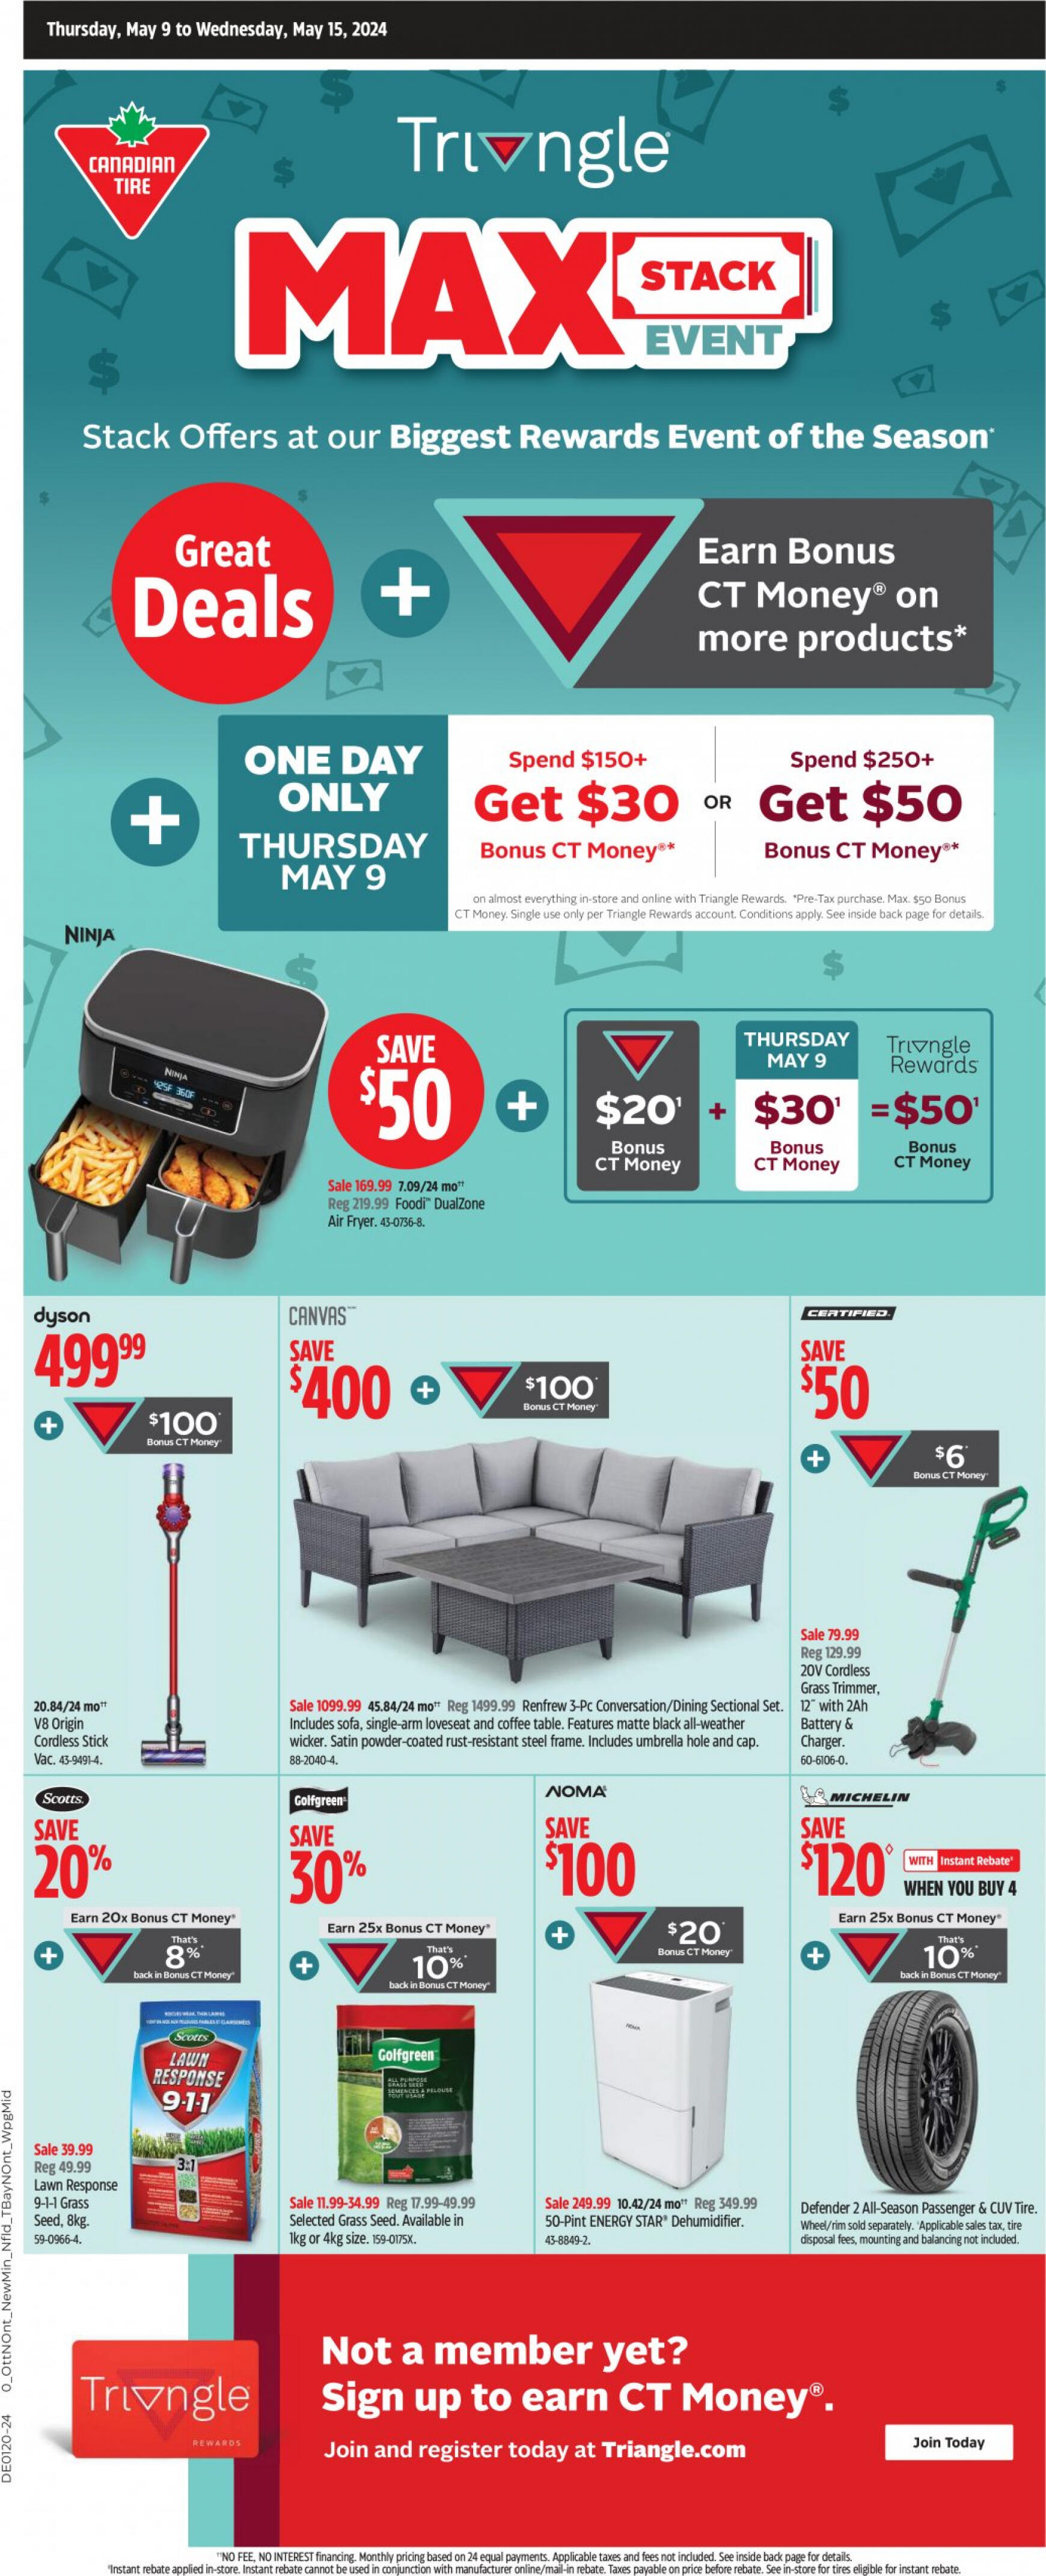 canadian-tire - Canadian Tire flyer current 09.05. - 15.05. - page: 1